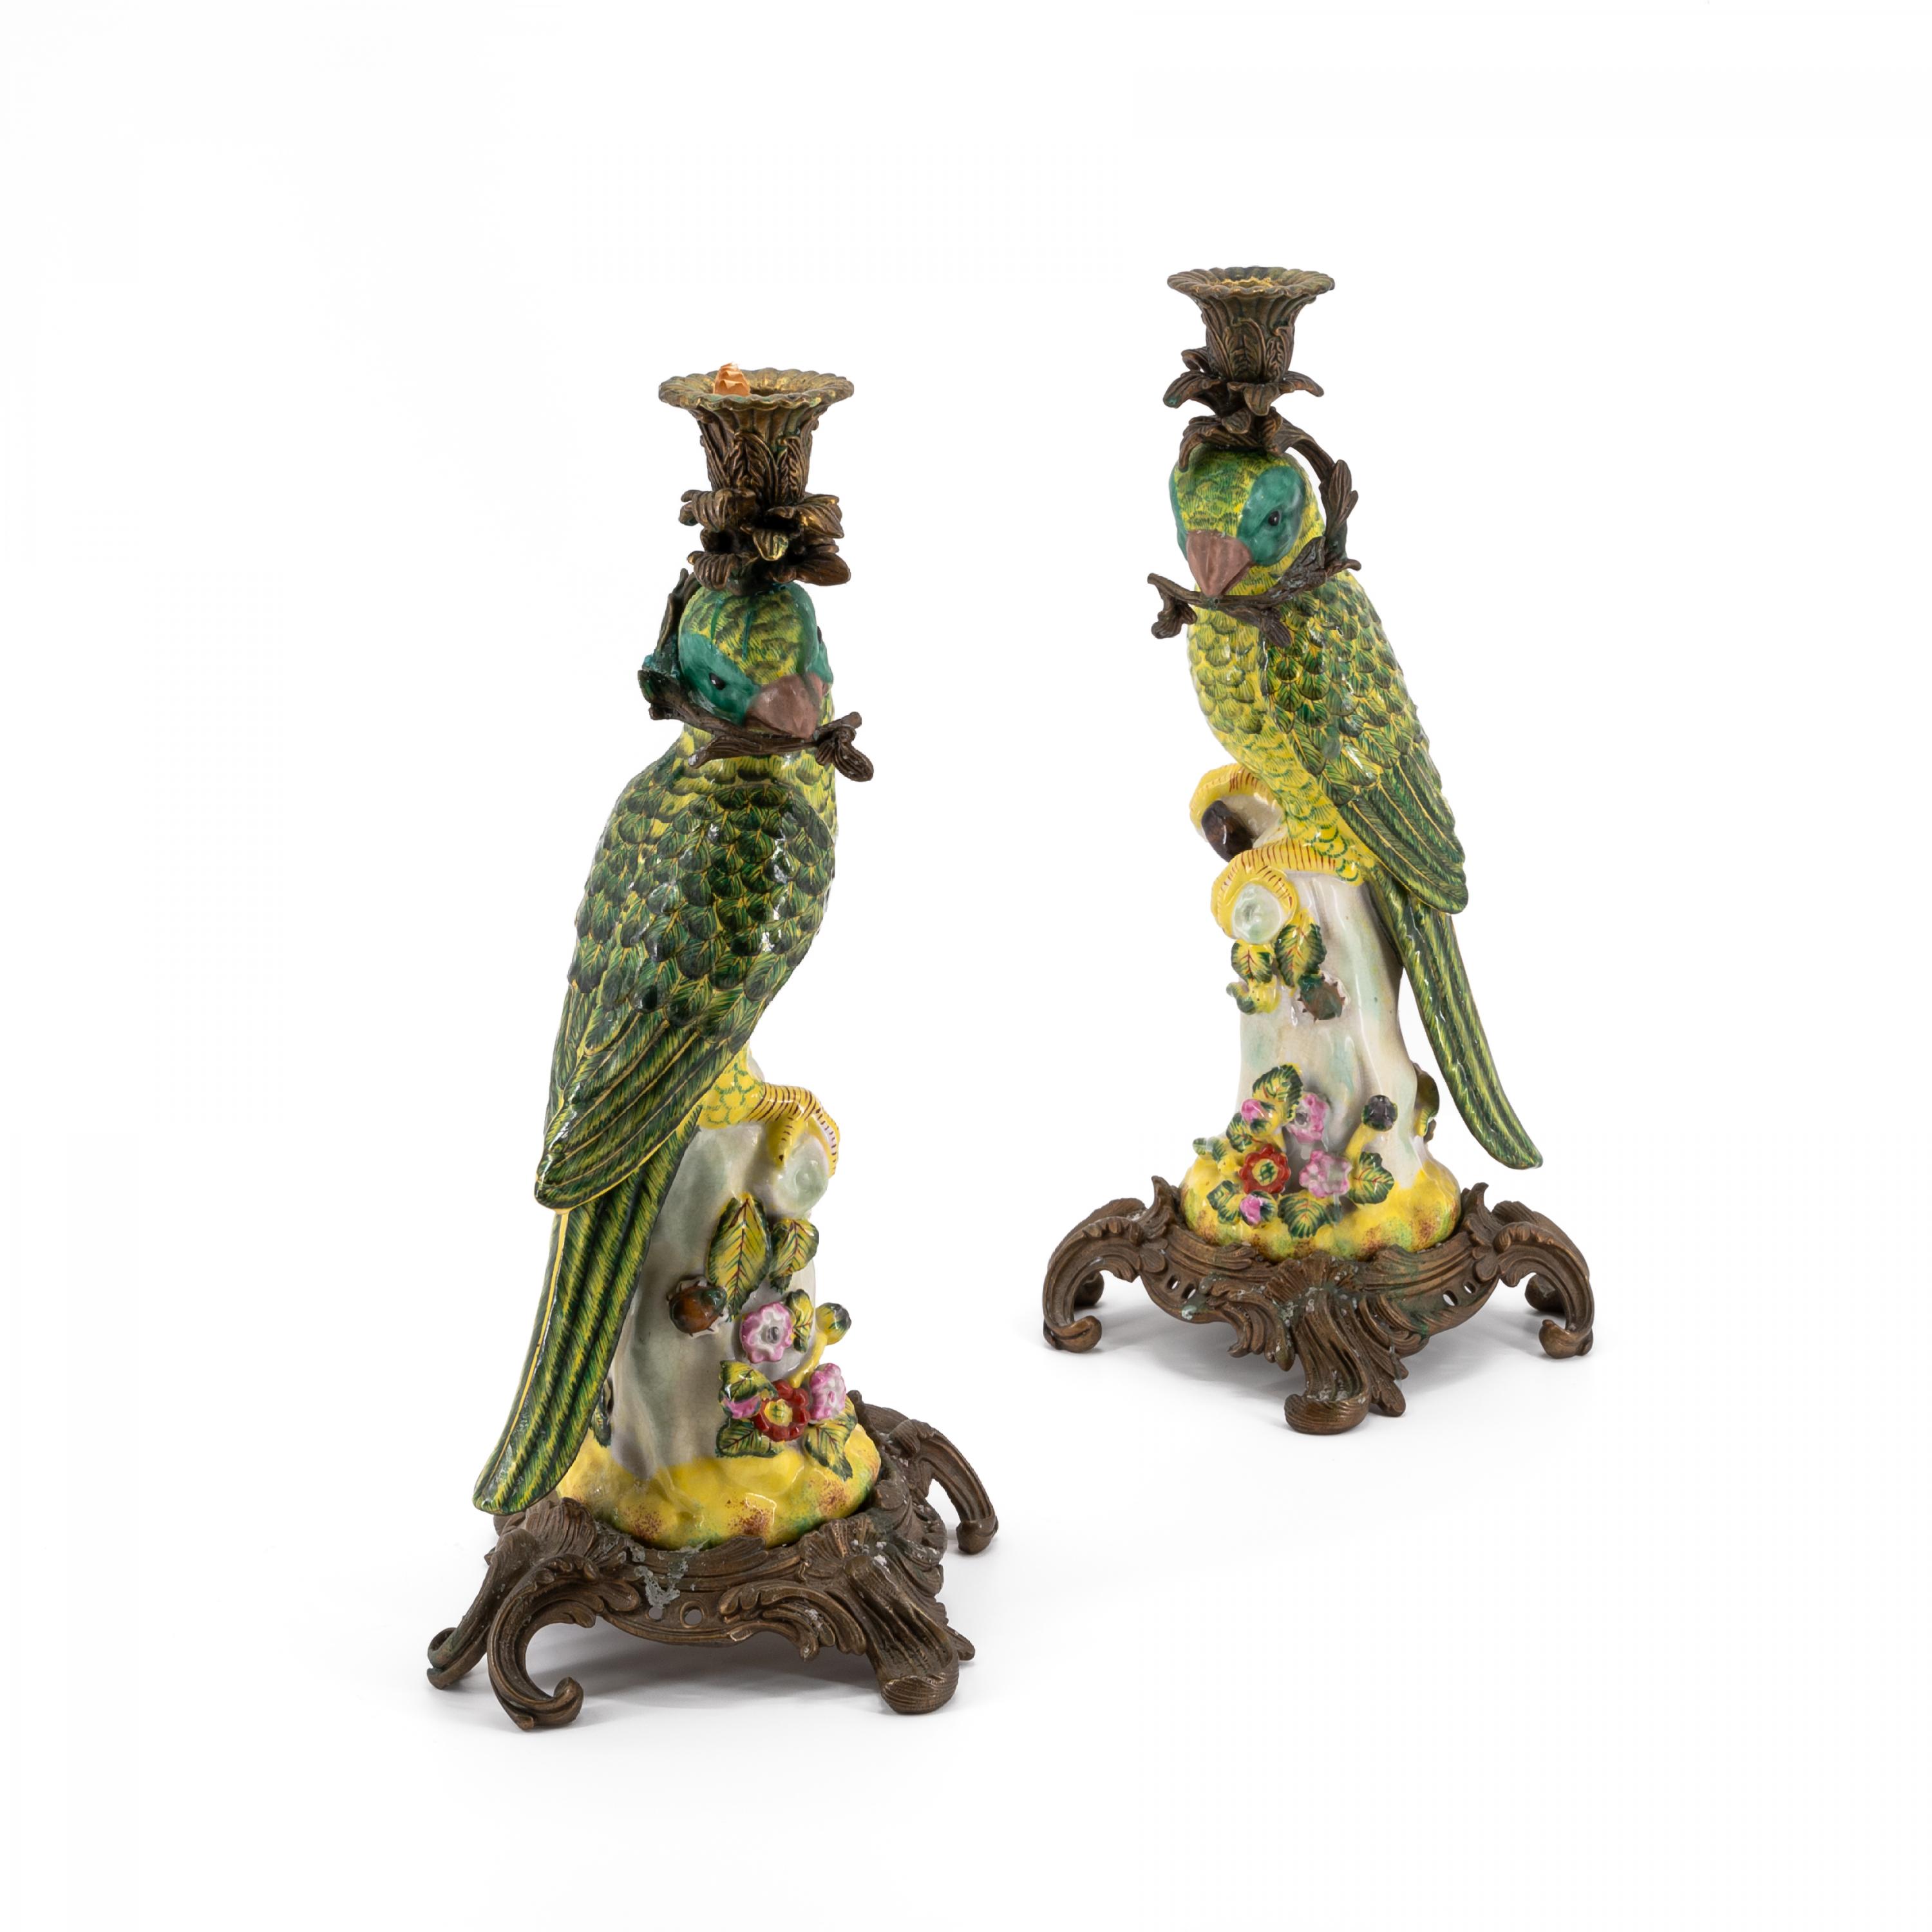 PAIR OF EXTRAORDINARY PORCELAIN CANDLESTICKS WITH PARROTS